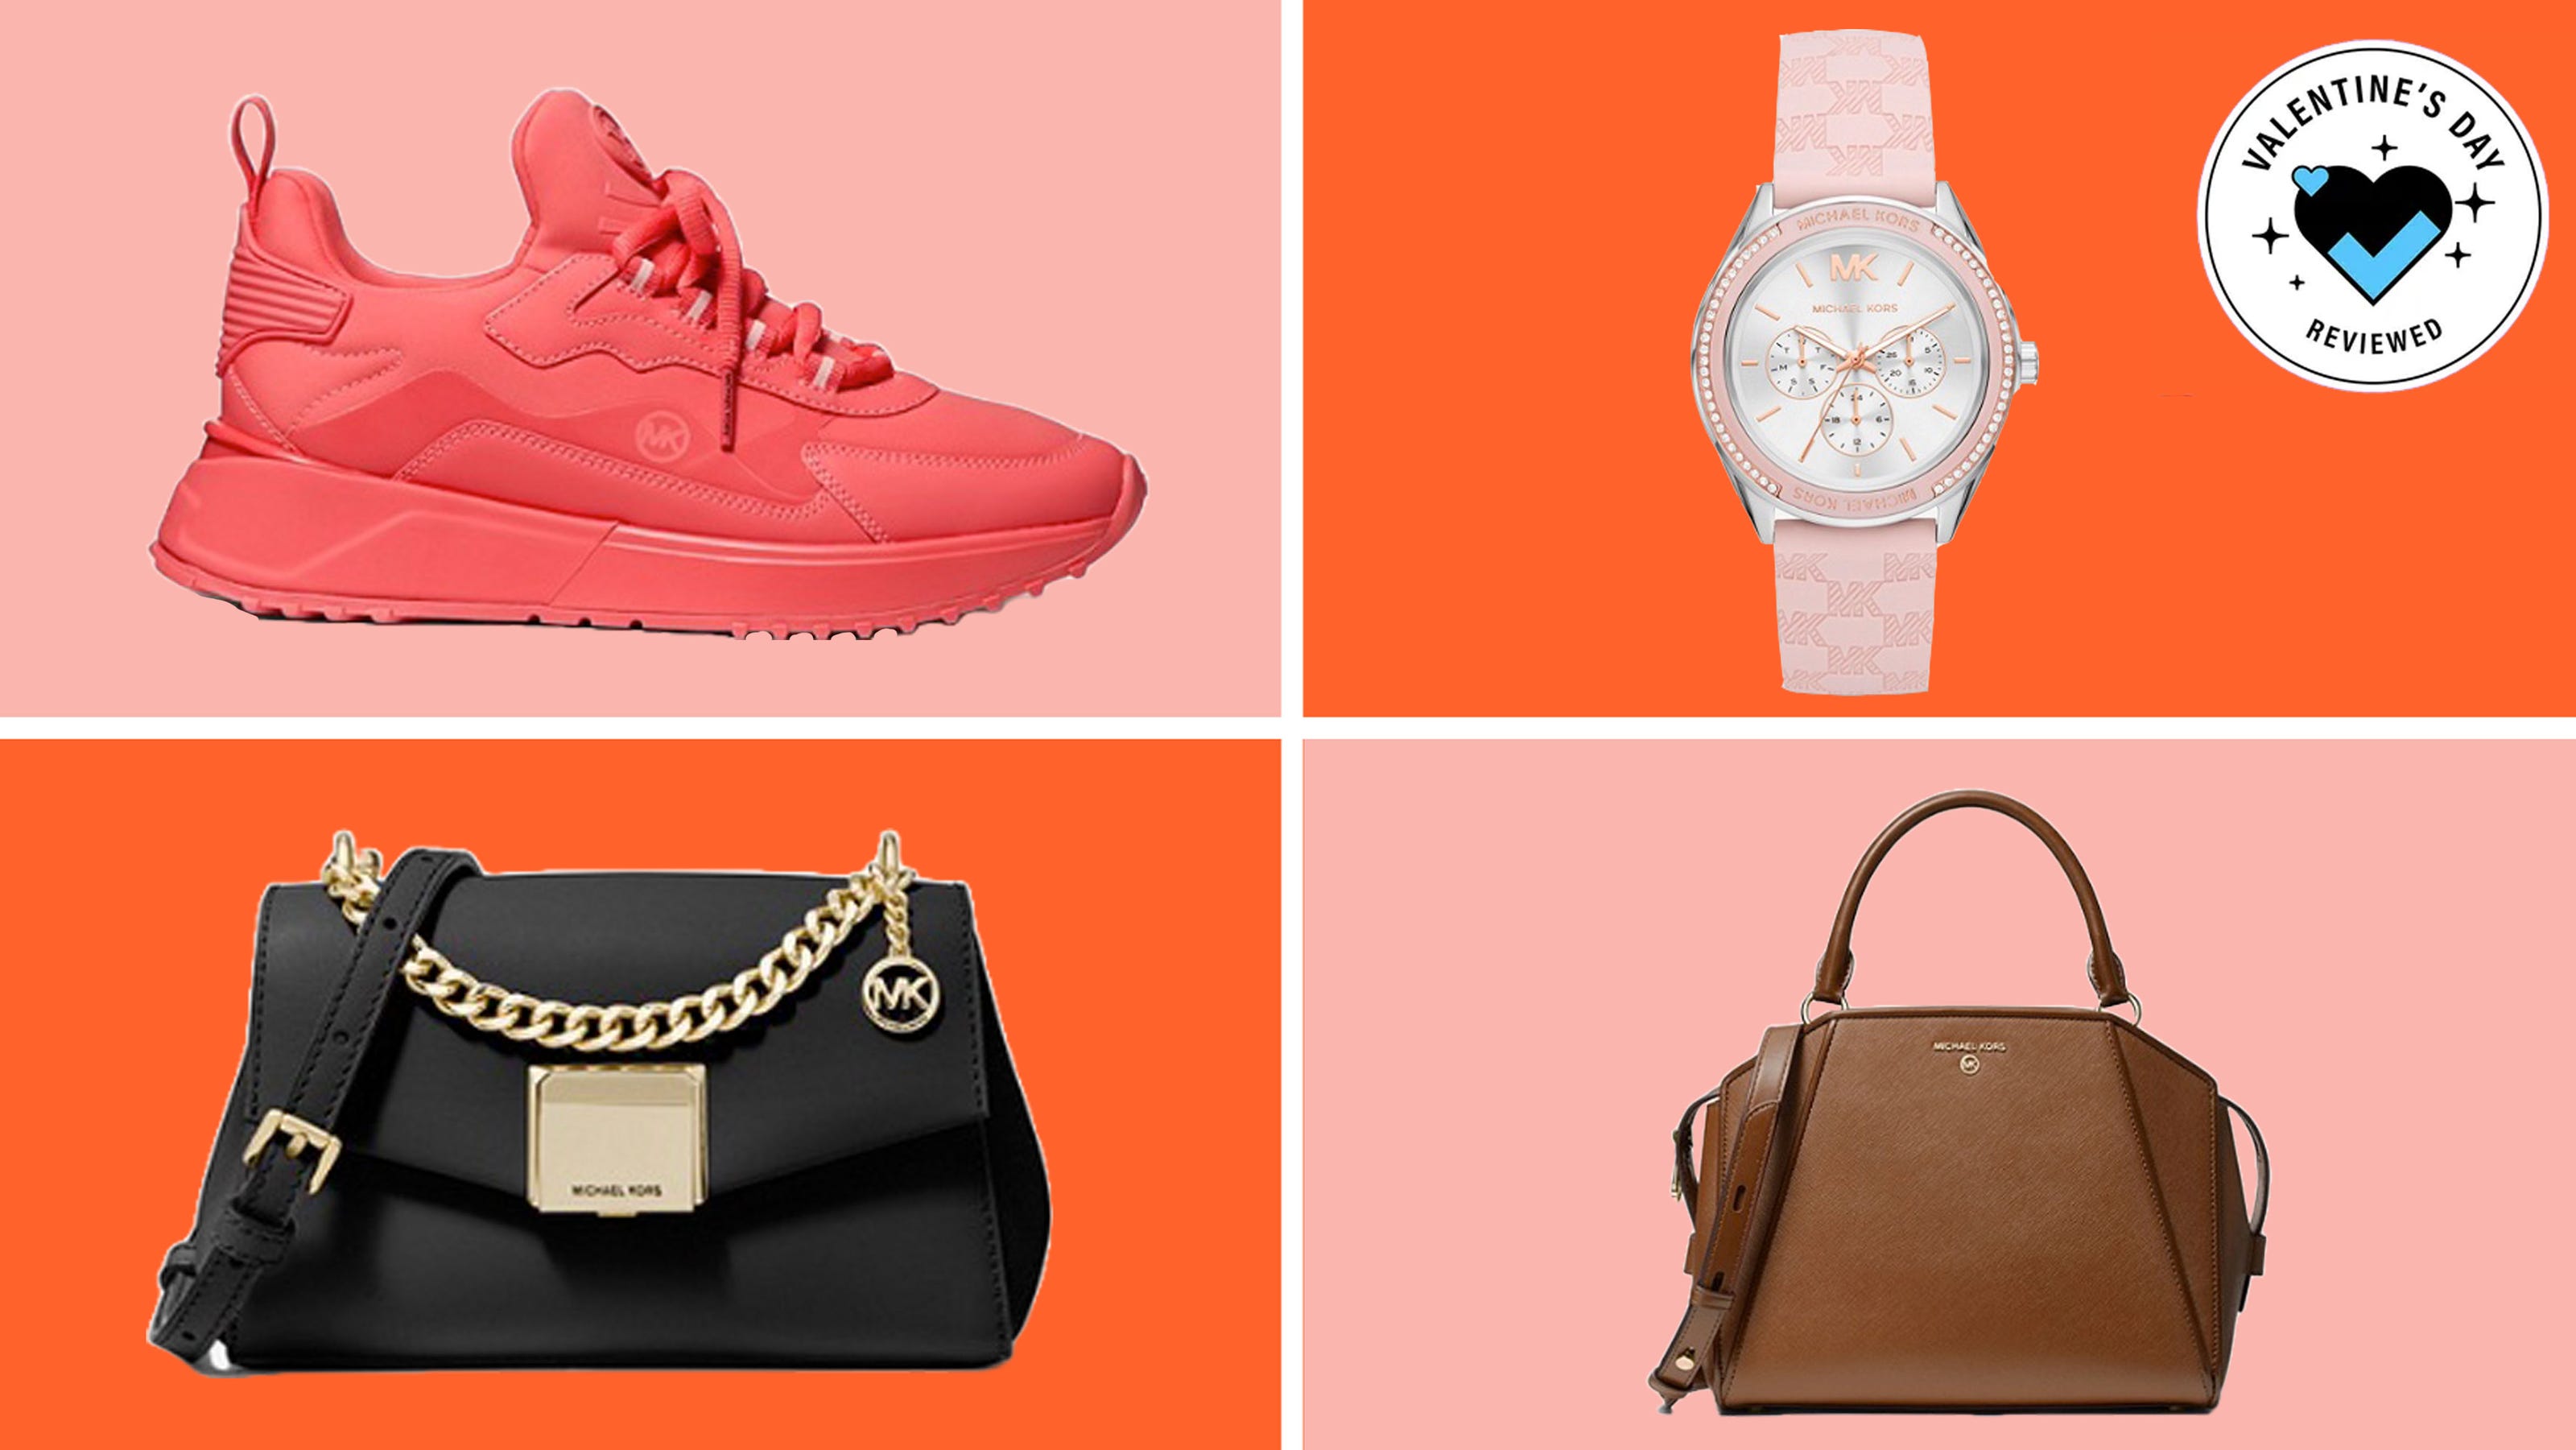 Michael Kors sale: Save up to 70% on purses and more for Valentine's Day